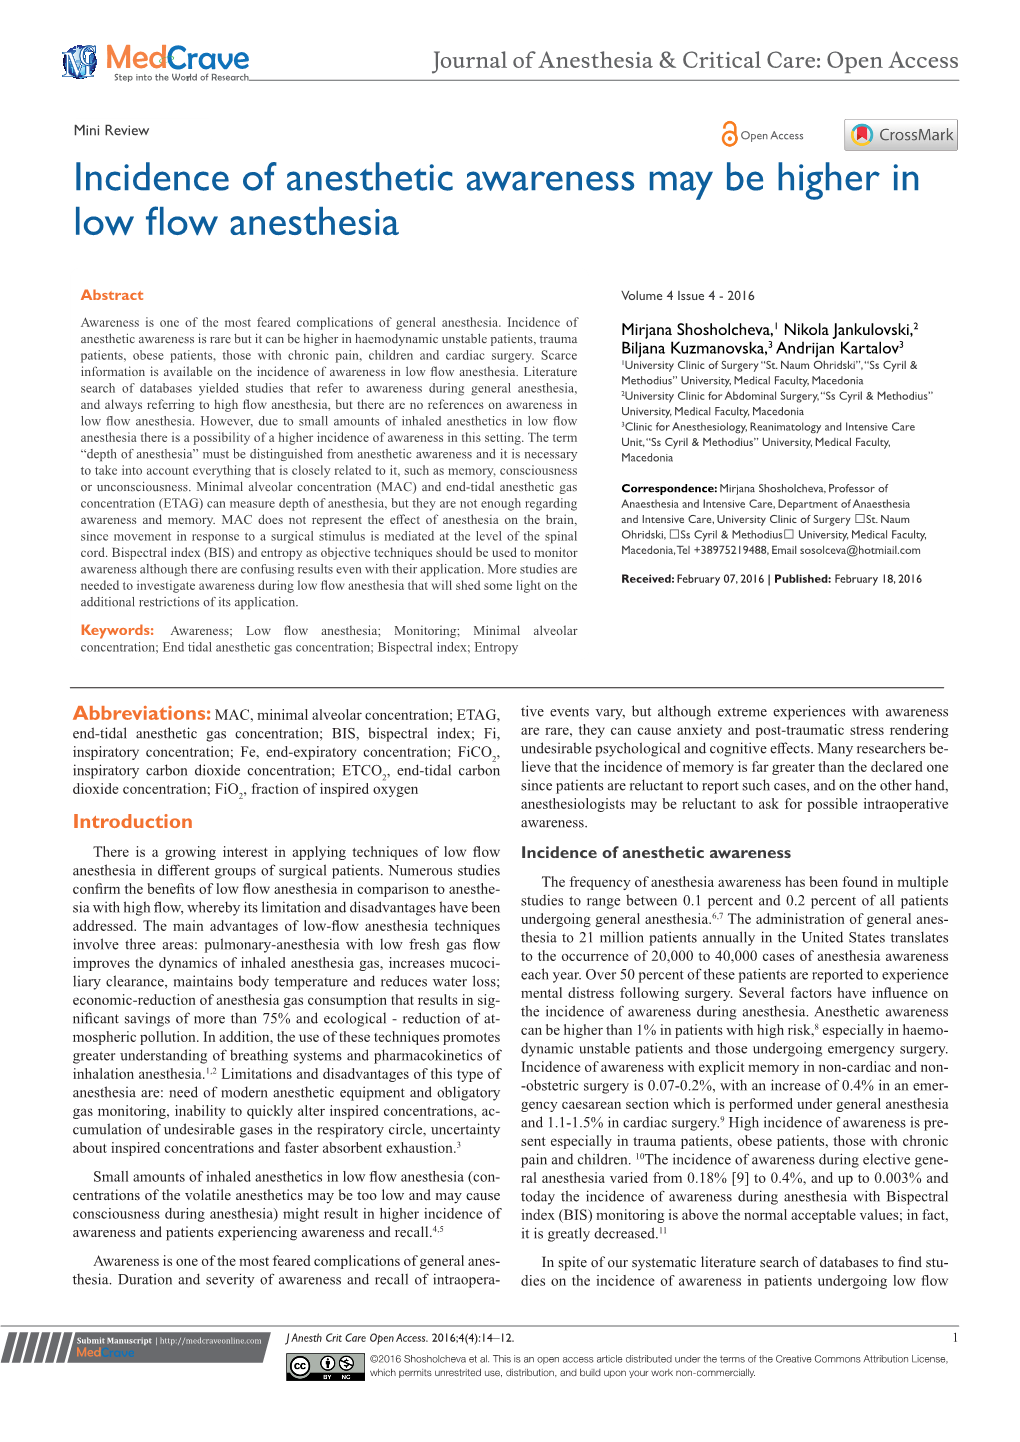 Incidence of Anesthetic Awareness May Be Higher in Low Flow Anesthesia